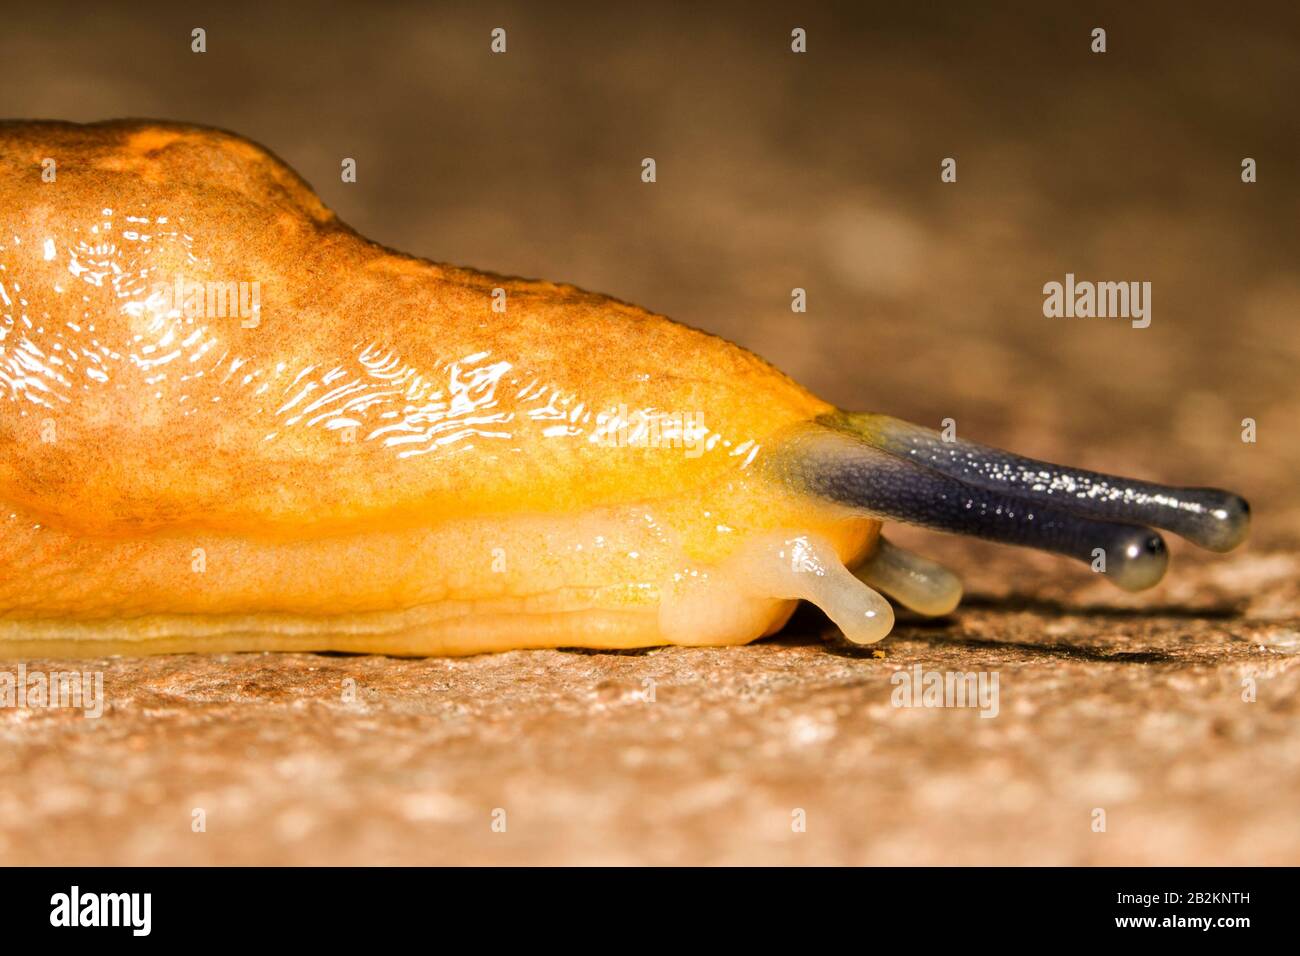 A Snail Without A Shell They Are Often Called Slugs Shoot In Ecuadorian Rainforest Stock Photo